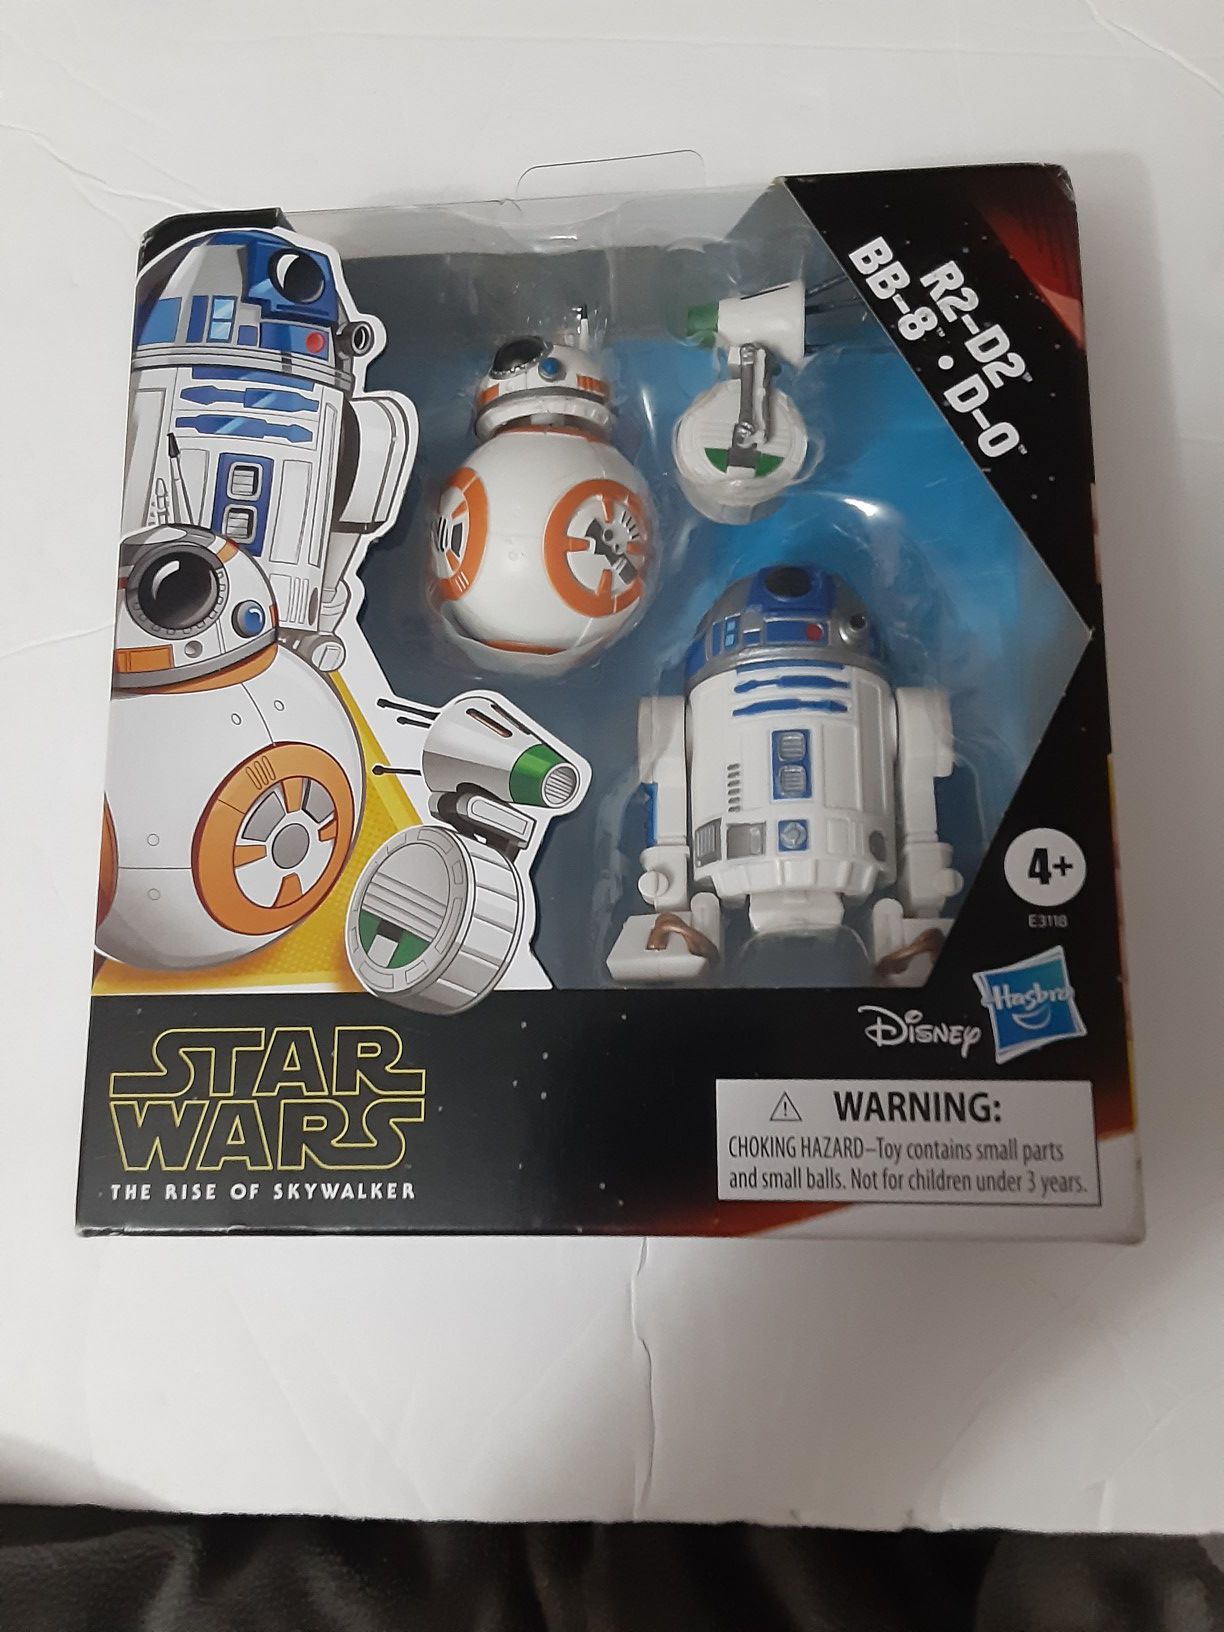 Star Wars Galaxy of Adventures R2-D2, BB-8, D-O 3-pack Toy Droid Figures